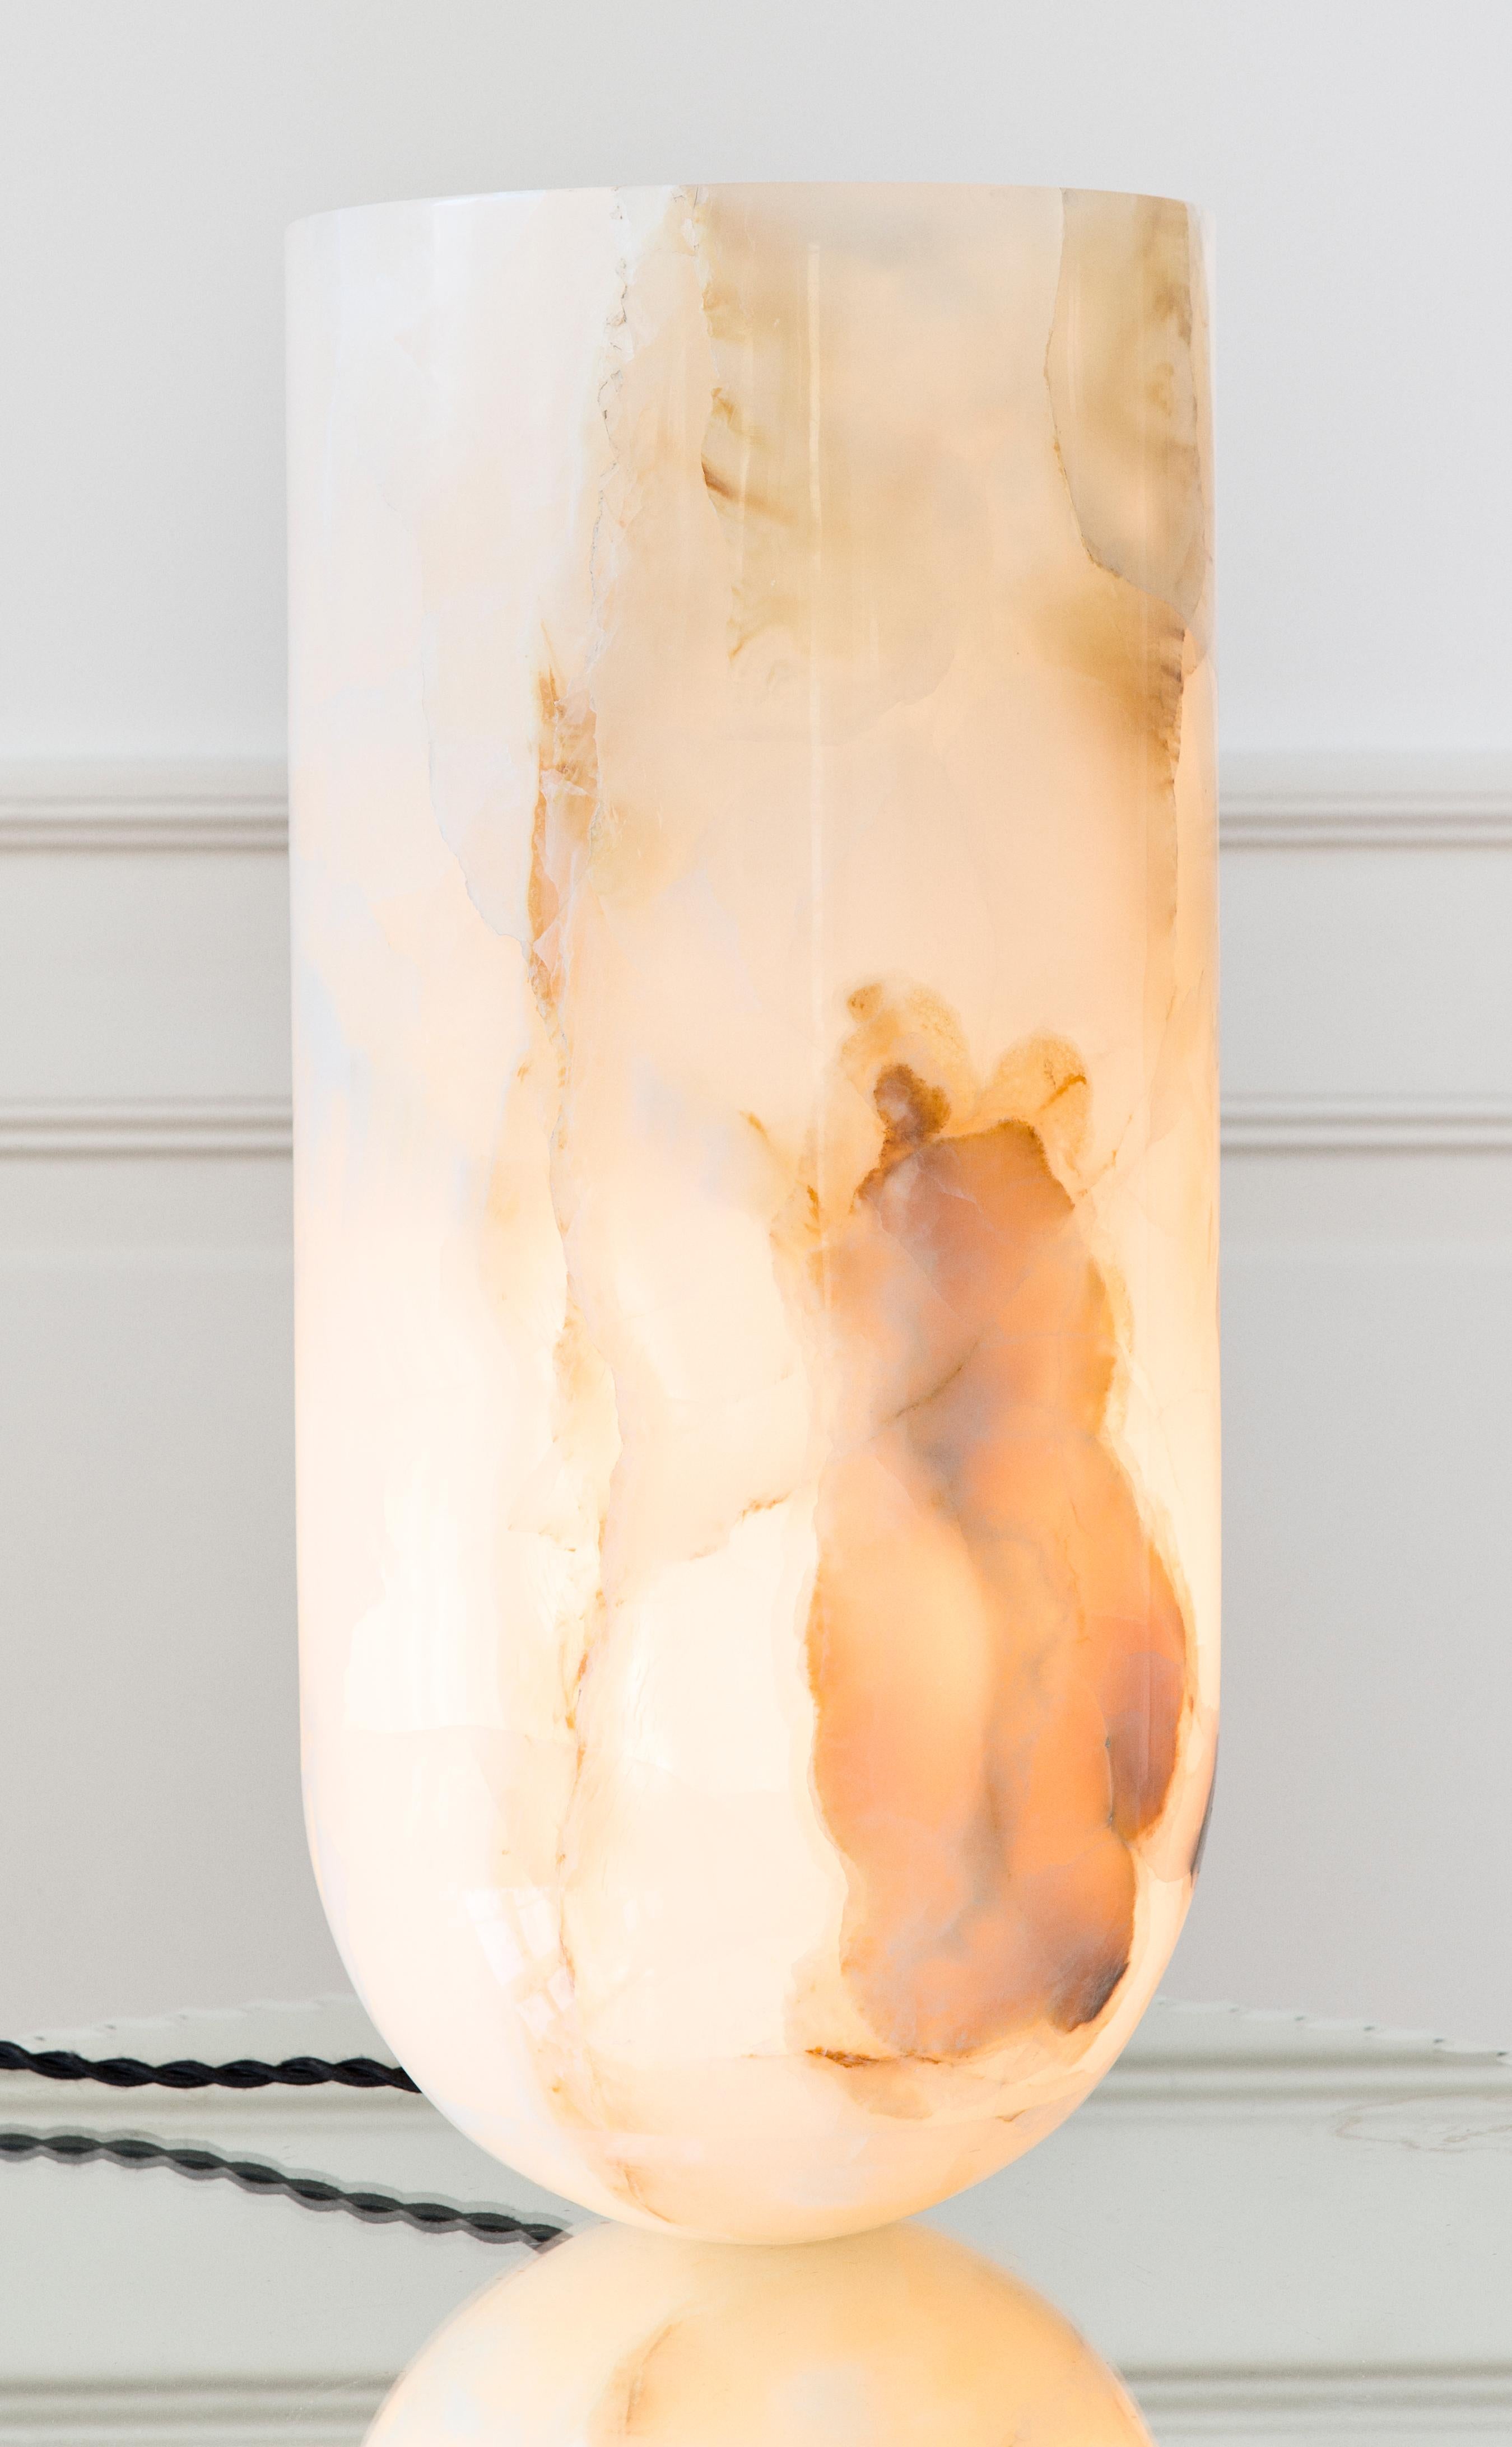 Table lamp made of one-piece of carved white onyx marble. 
Designed in 2007 by Michael Anastassiades.